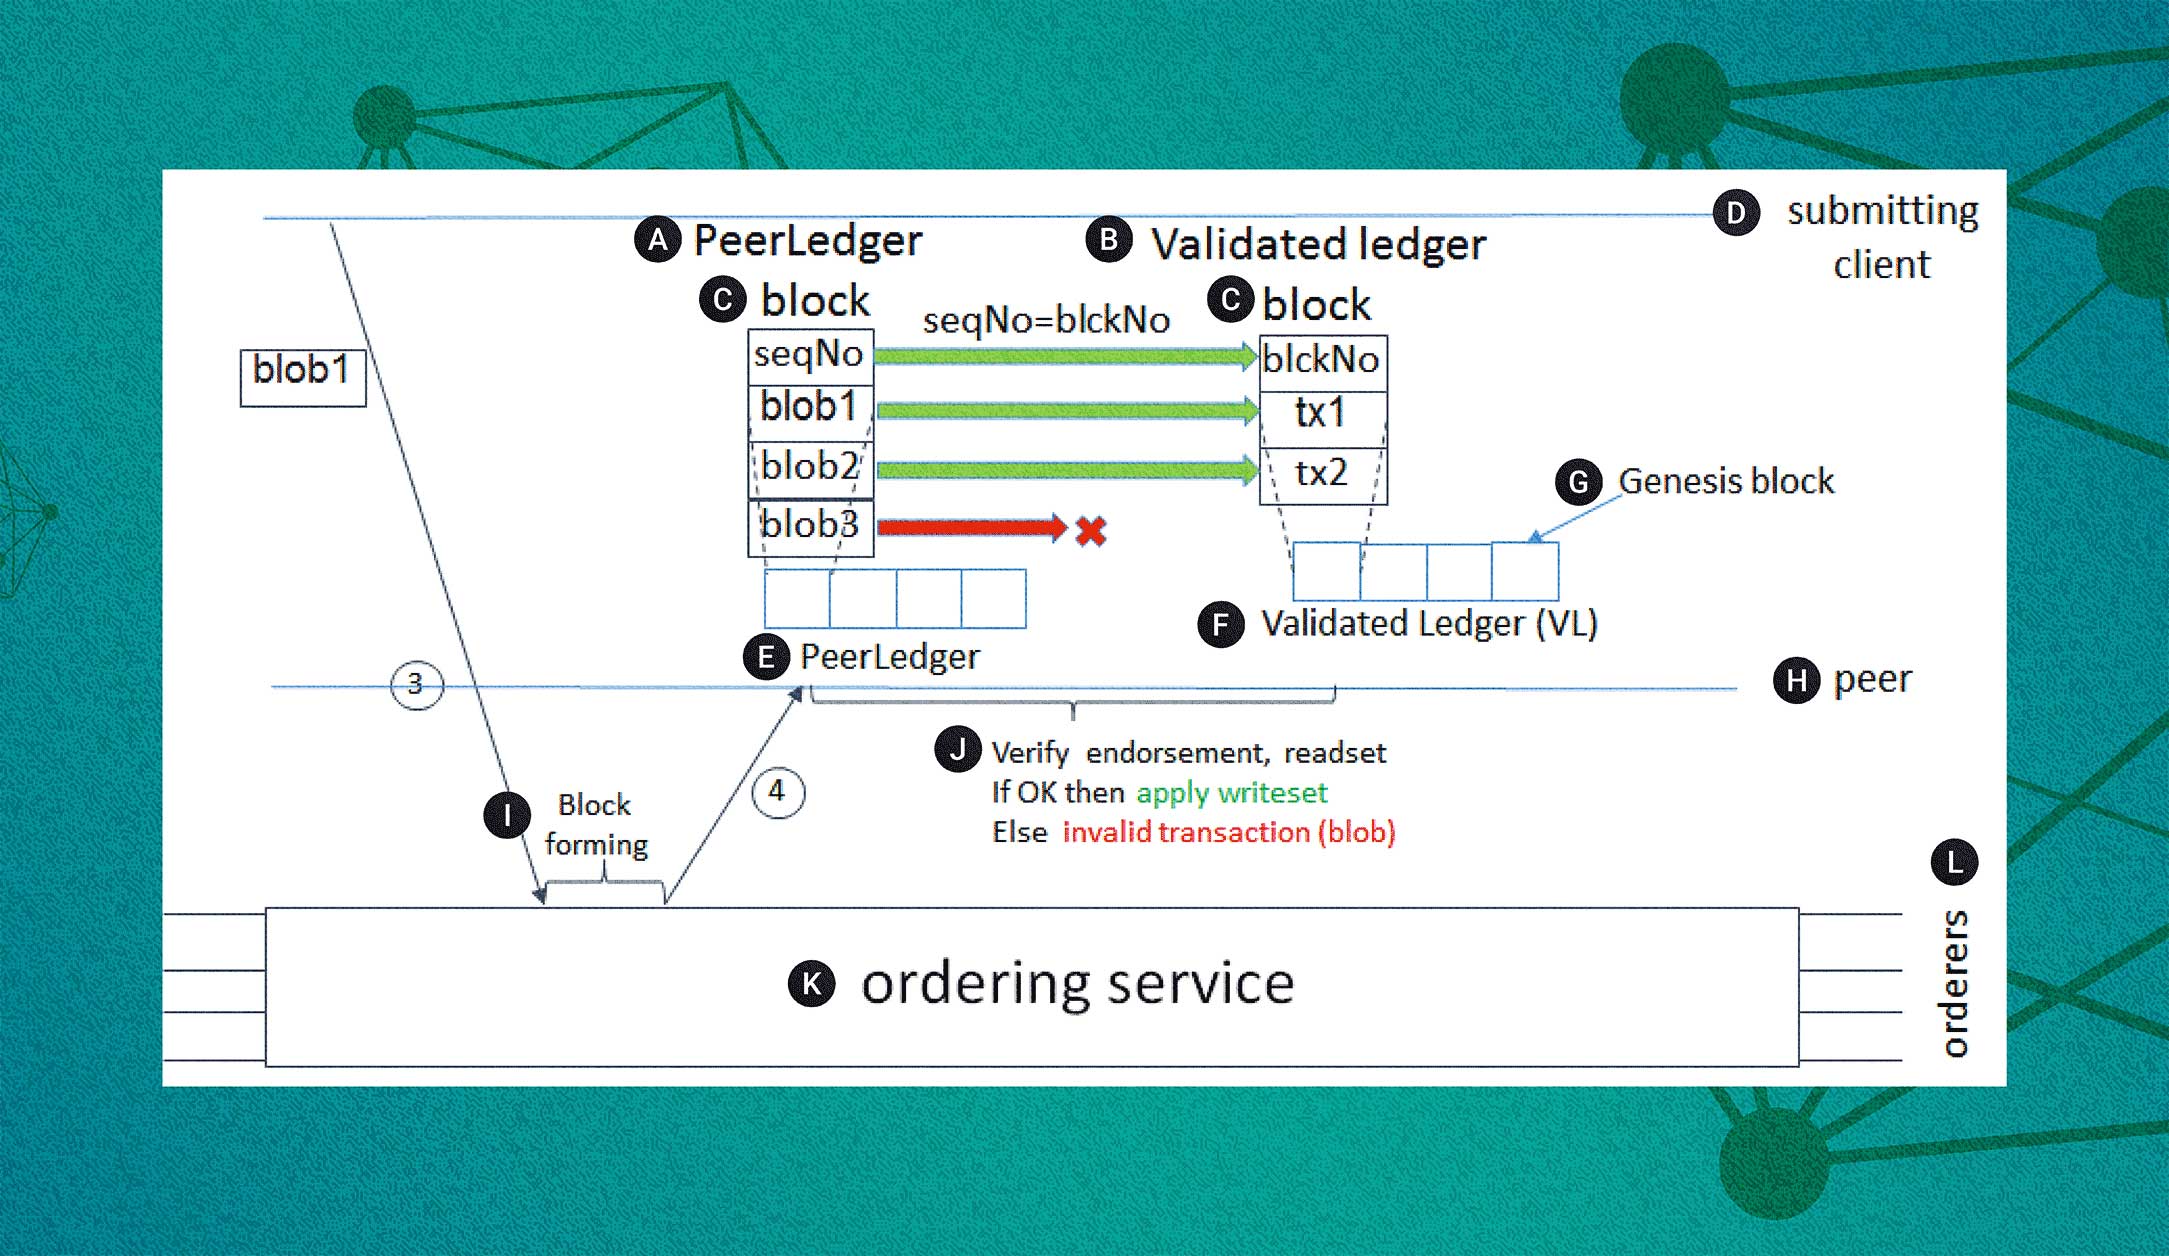 ILLUSTRATION OF THE VALIDATION PROCESS // <a href='https://hyperledger-fabric.readthedocs.io/en/release-1.3/arch-deep-dive.html' target='_blank'>HYPERLEDGER DOCS</a>